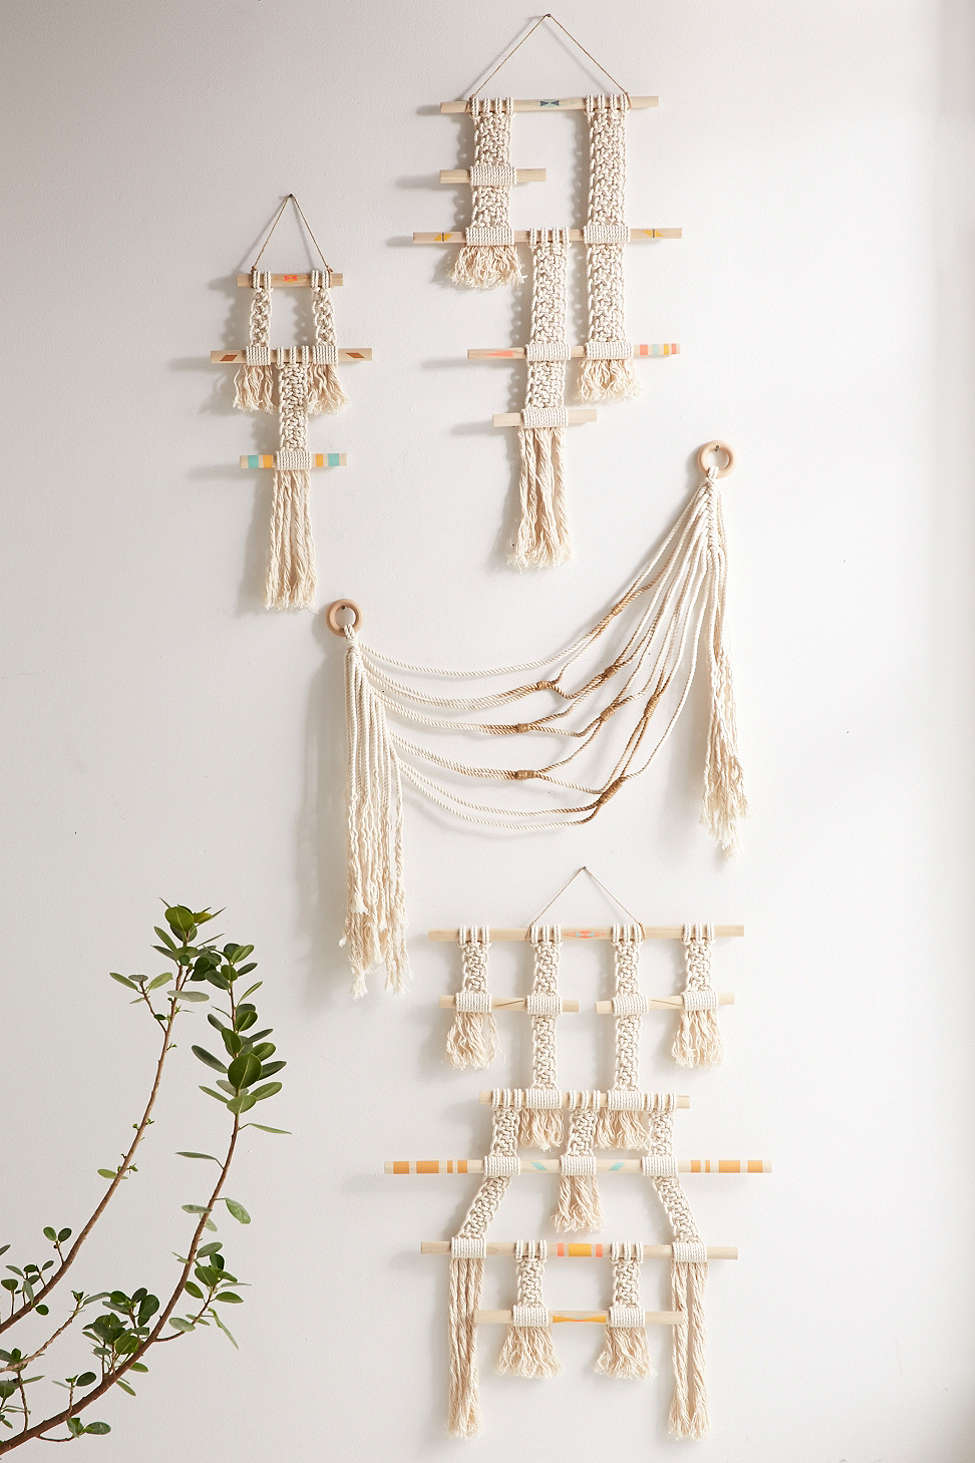 Macrame wall hangings from Urban Outfitters